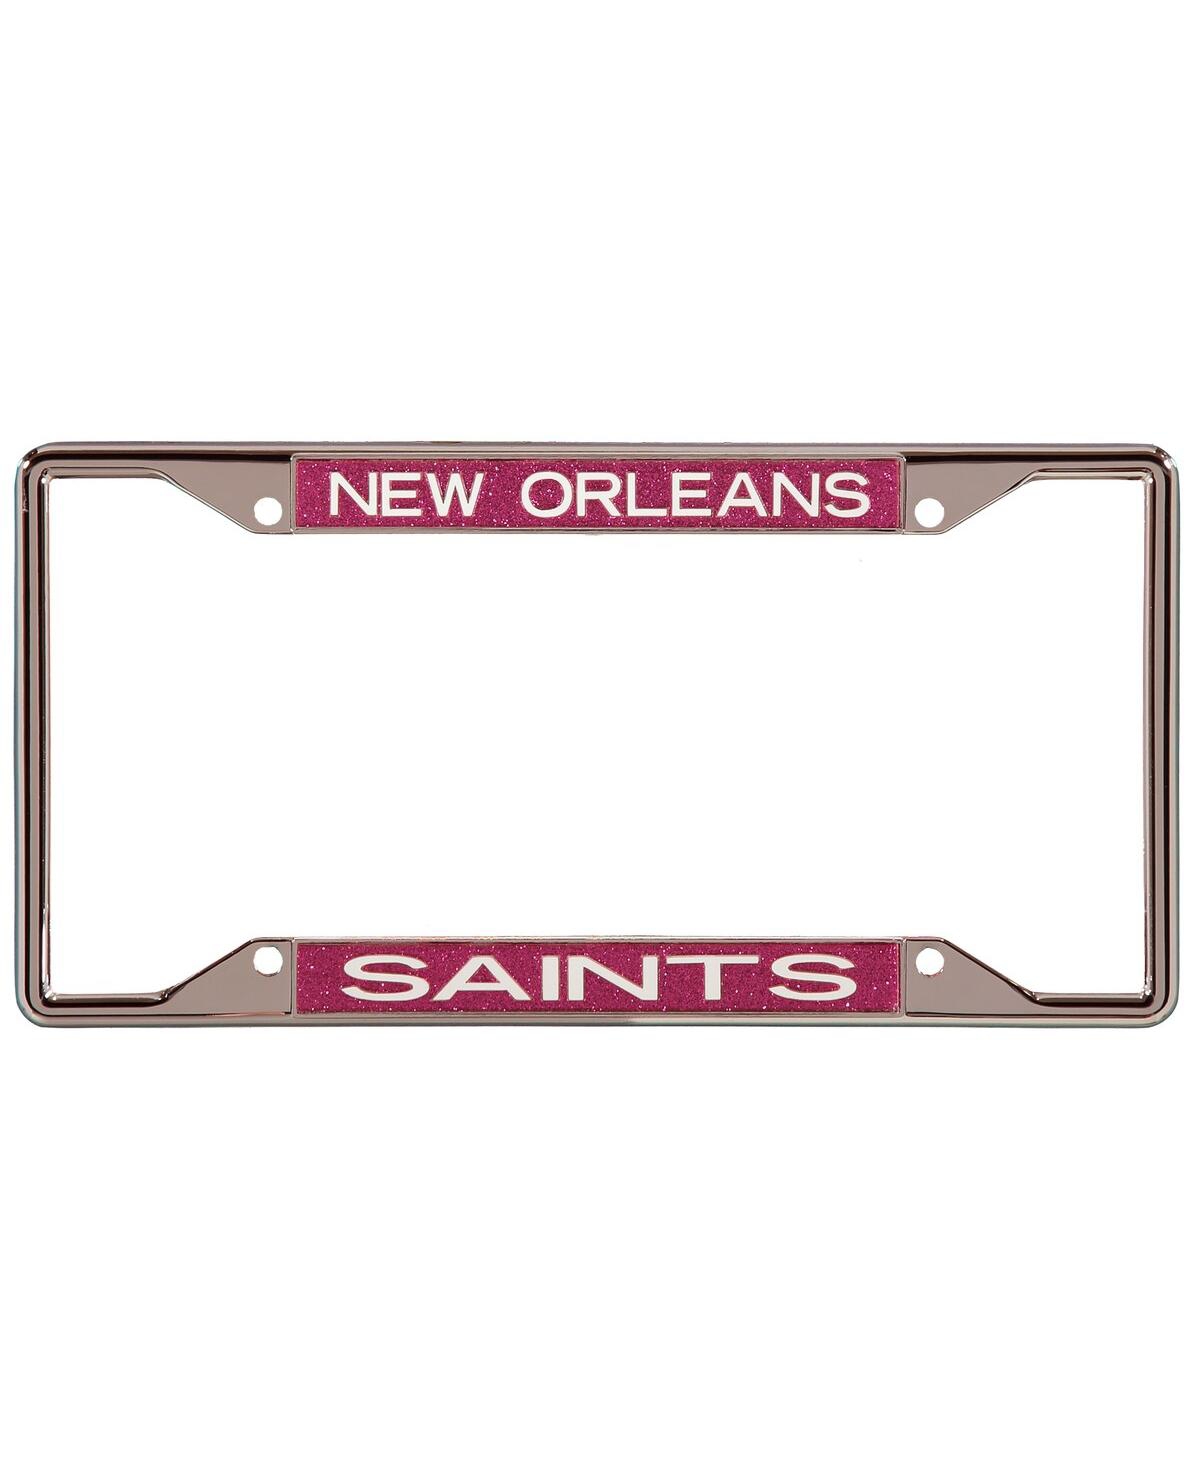 STOCKDALE NEW ORLEANS SAINTS PINK GLITTER LICENSE PLATE FRAME WITH WHITE LETTERING